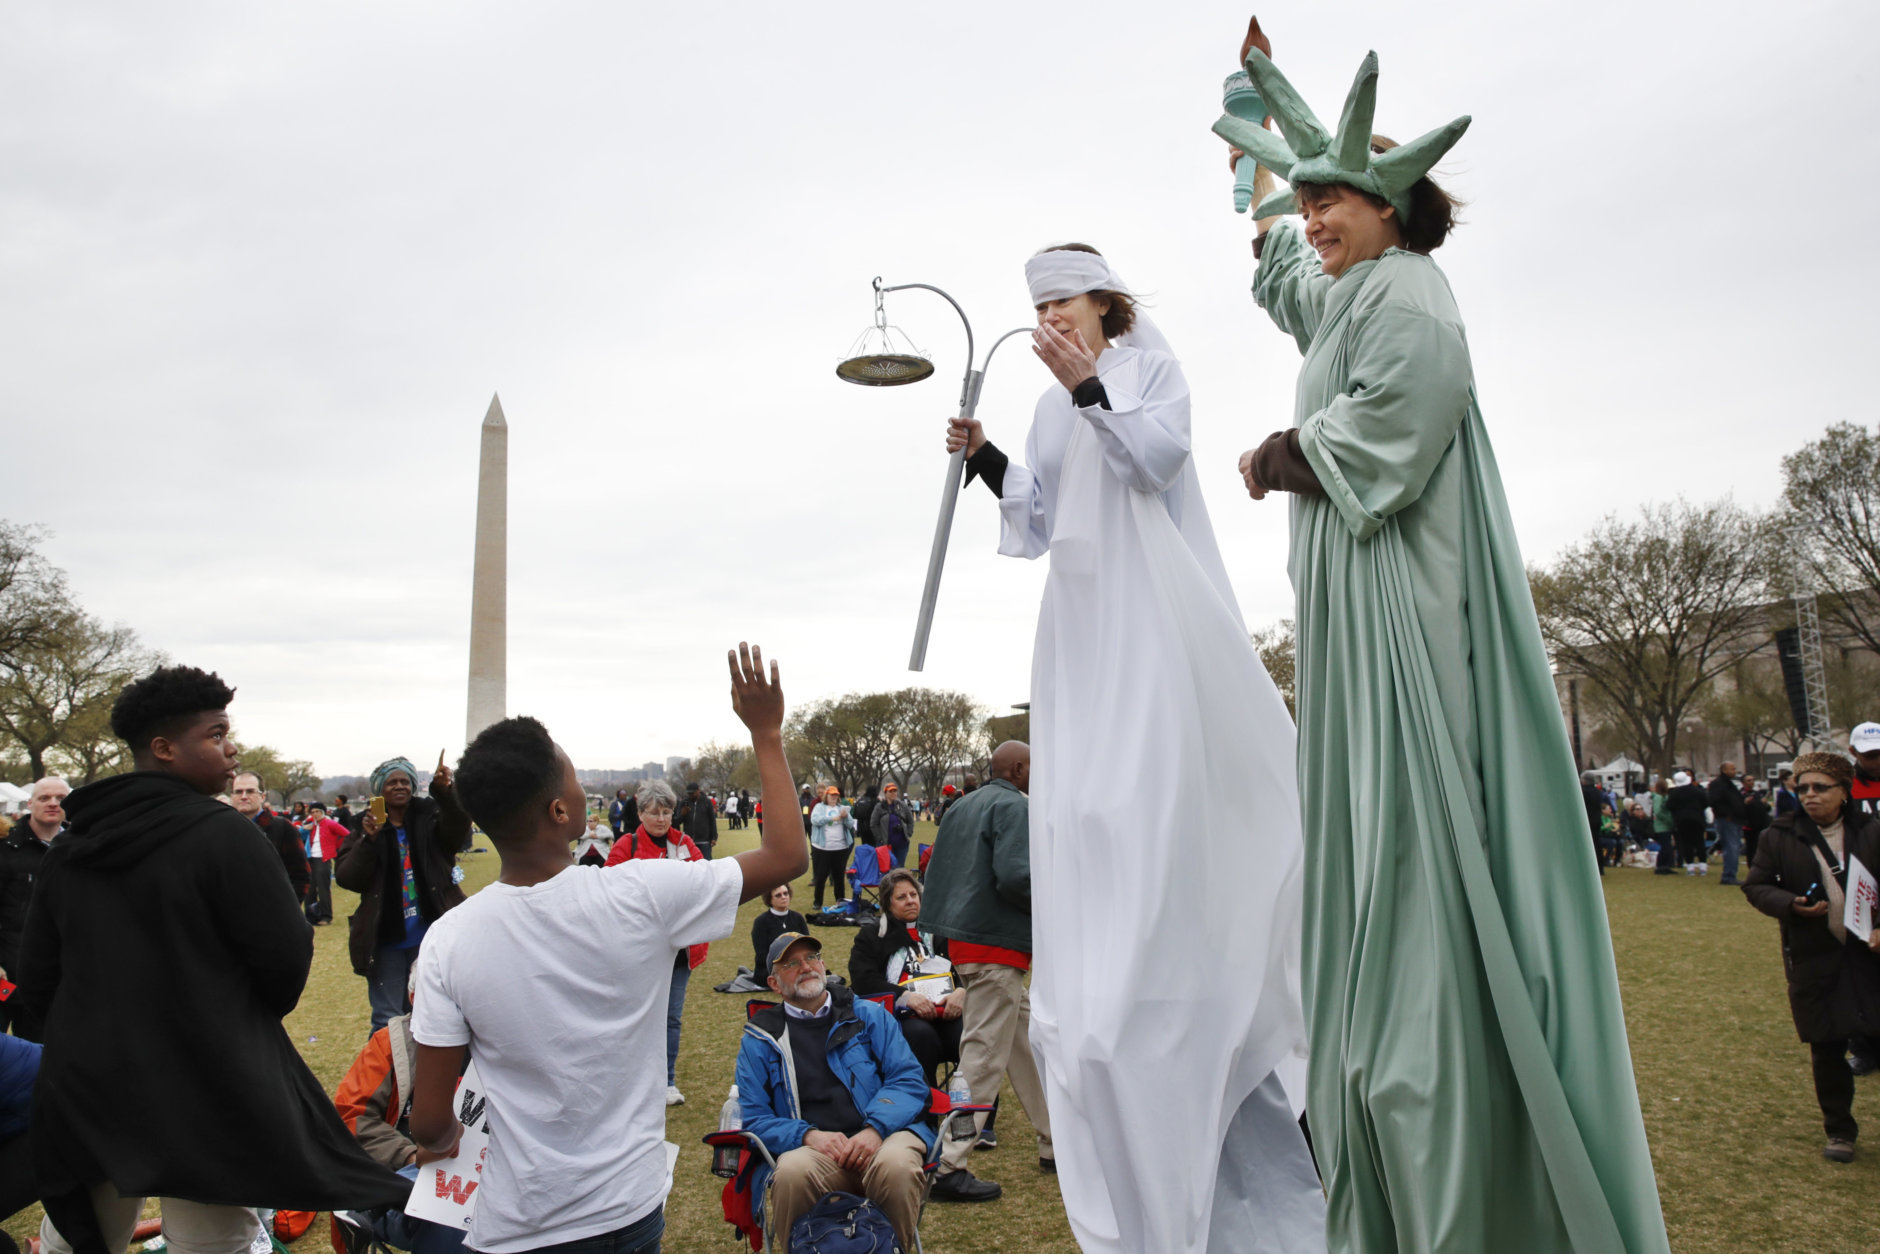 Eric McLaughlin, 14, left, and his cousin Markale McLean, 13, both of Washington, wave to Carolyn McCarthy, dressed on stilts as "Lady Justice," and Debbie Davis, dressed as "Lady Liberty," both of Milwaukee, Wisc., as they attend the A.C.T. To End Racism rally, Wednesday, April 4, 2018, on the National Mall in Washington, on the 50th anniversary of Martin Luther King Jr.'s assassination. (AP Photo/Jacquelyn Martin)